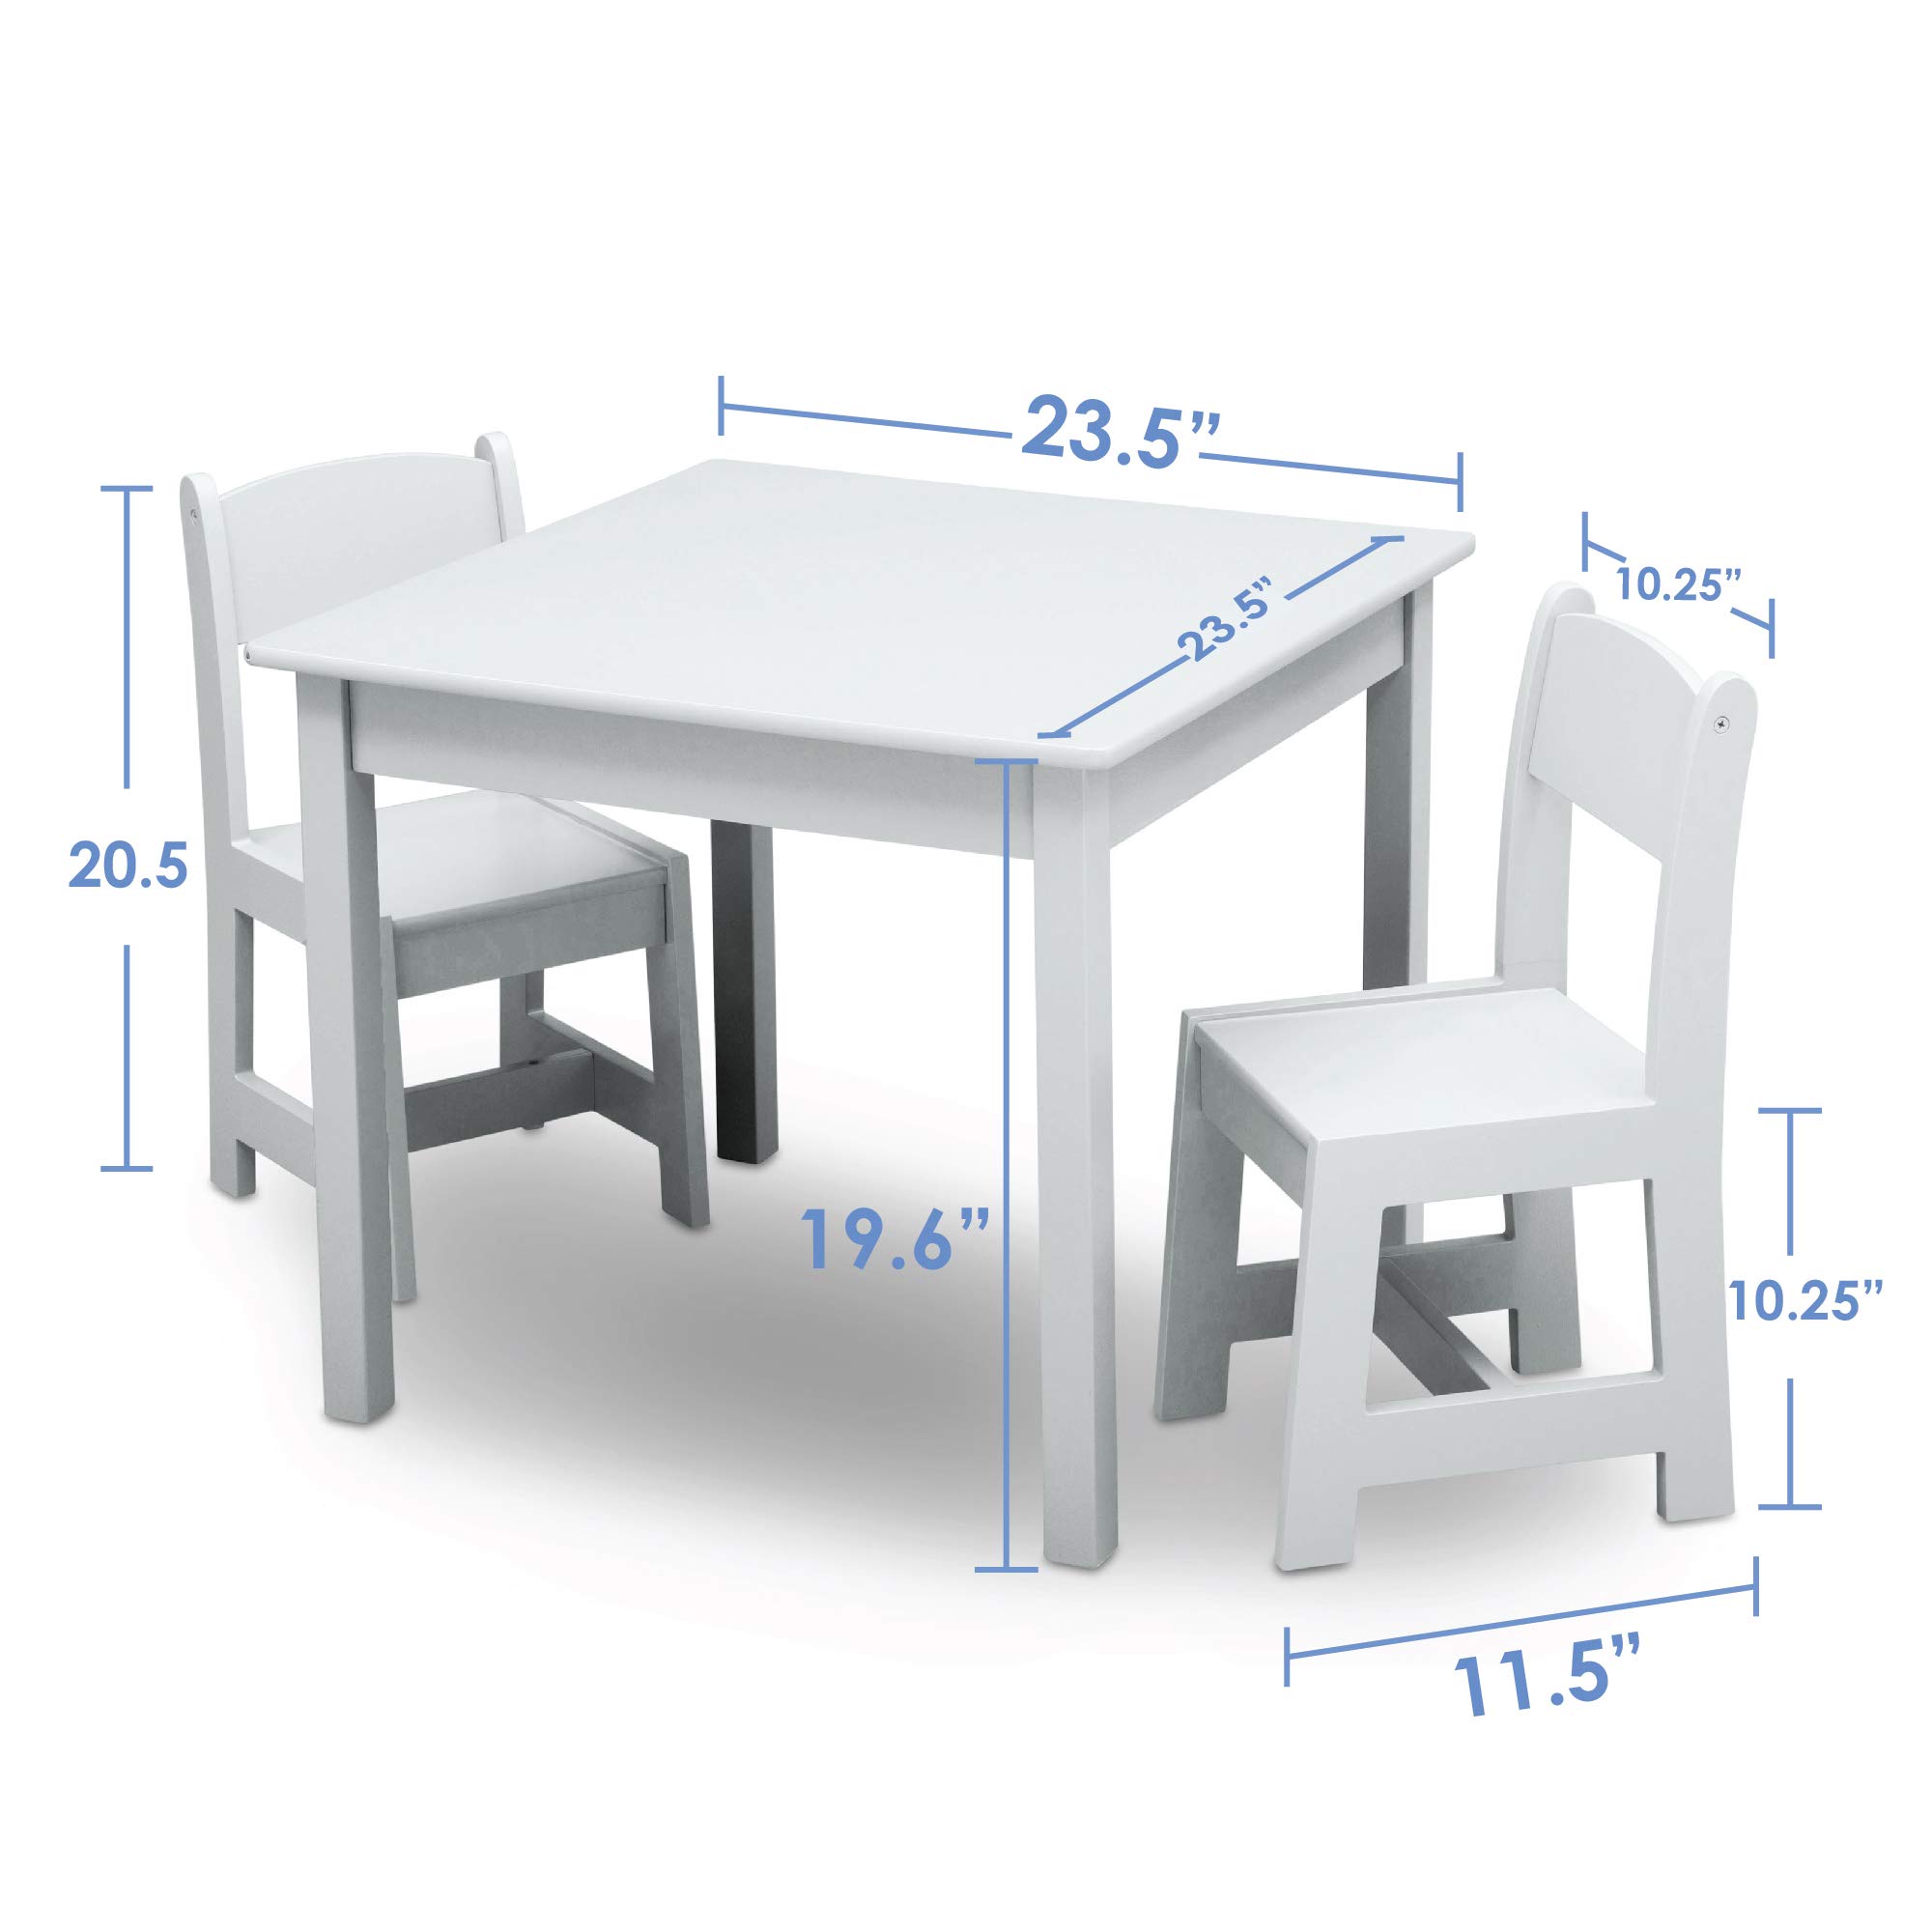 Delta Children MySize Kids Wood Table and Chair Set (2 Chairs Included) - Ideal for Arts & Crafts, Snack Time, & More - Greenguard Gold Certified, Bianca White, 3 Piece Set